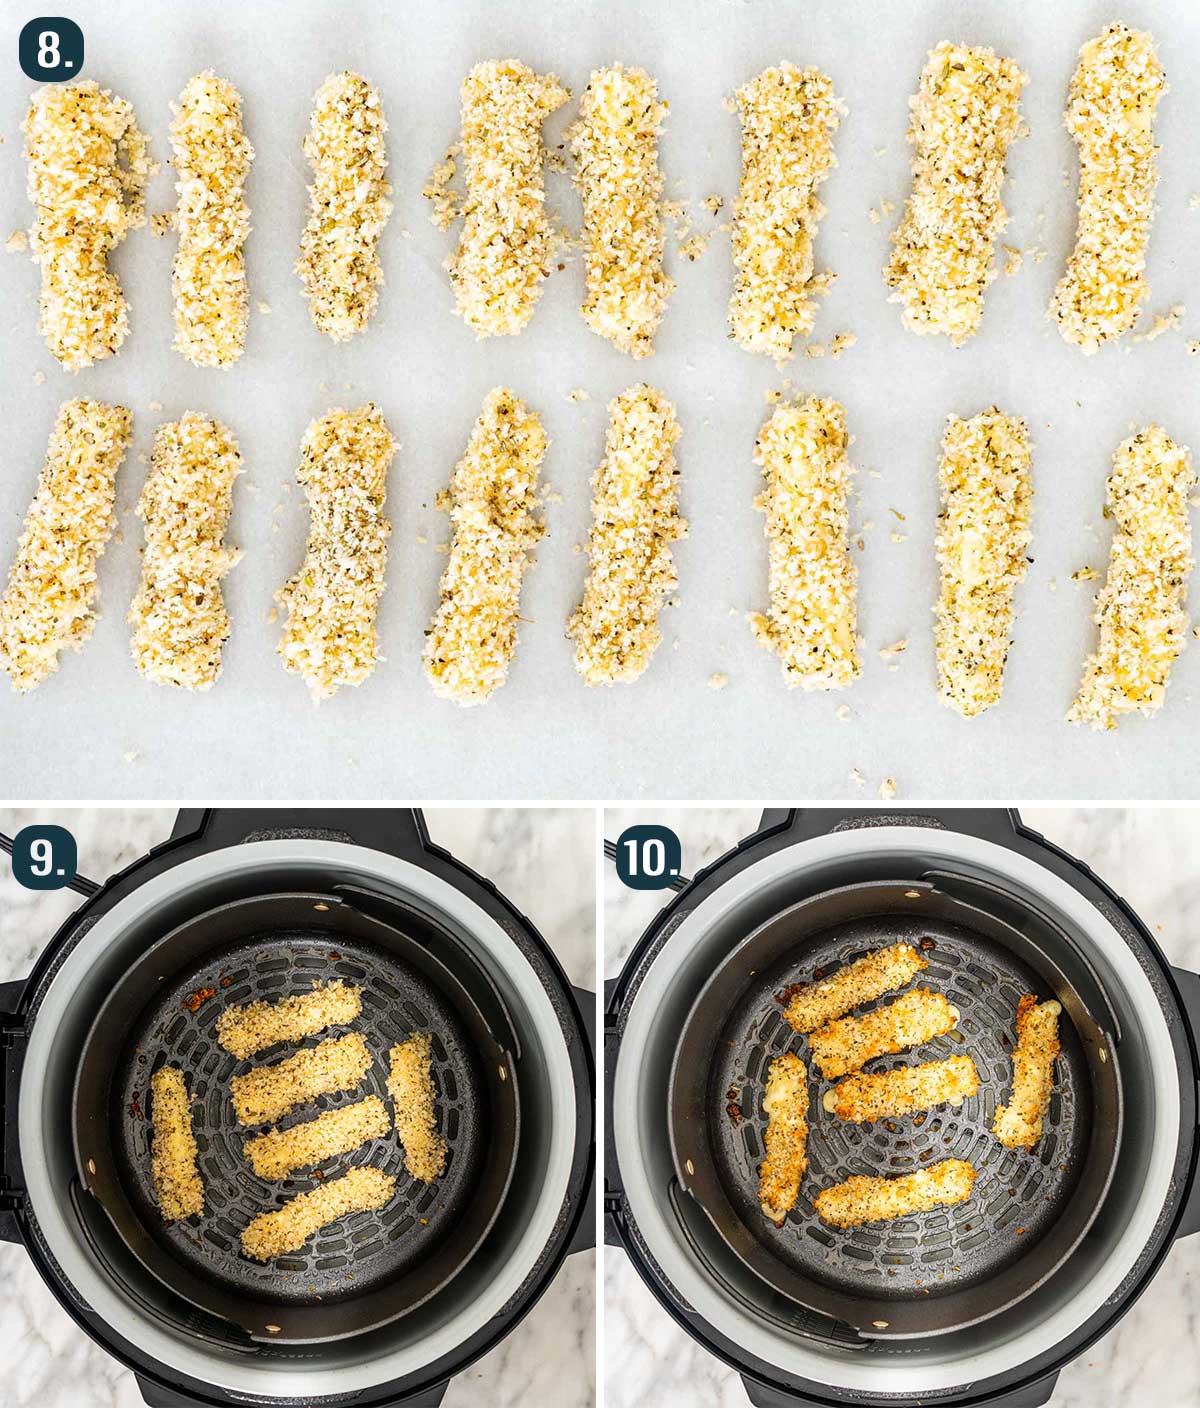 process shots showing how to cook mozzarella sticks in the air fryer